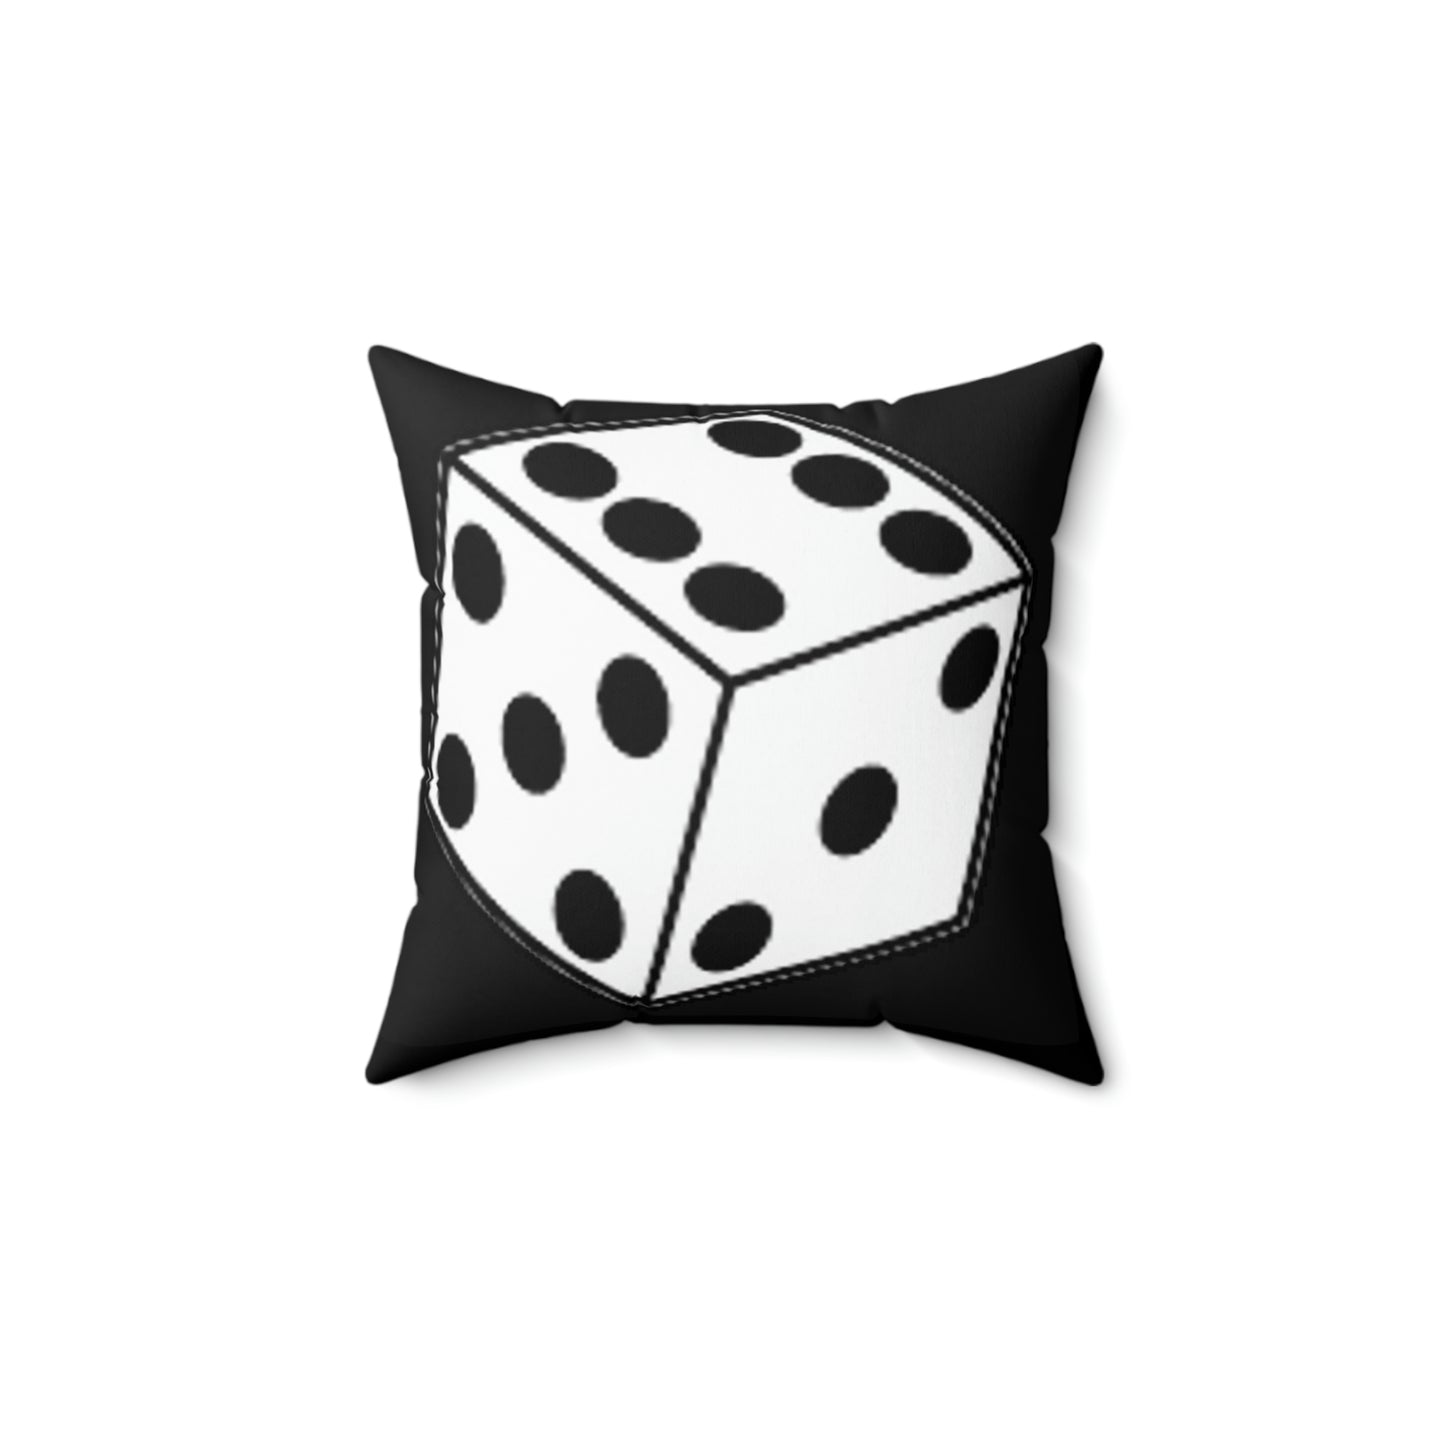 Dice Roll Spun Polyester Square Pillow